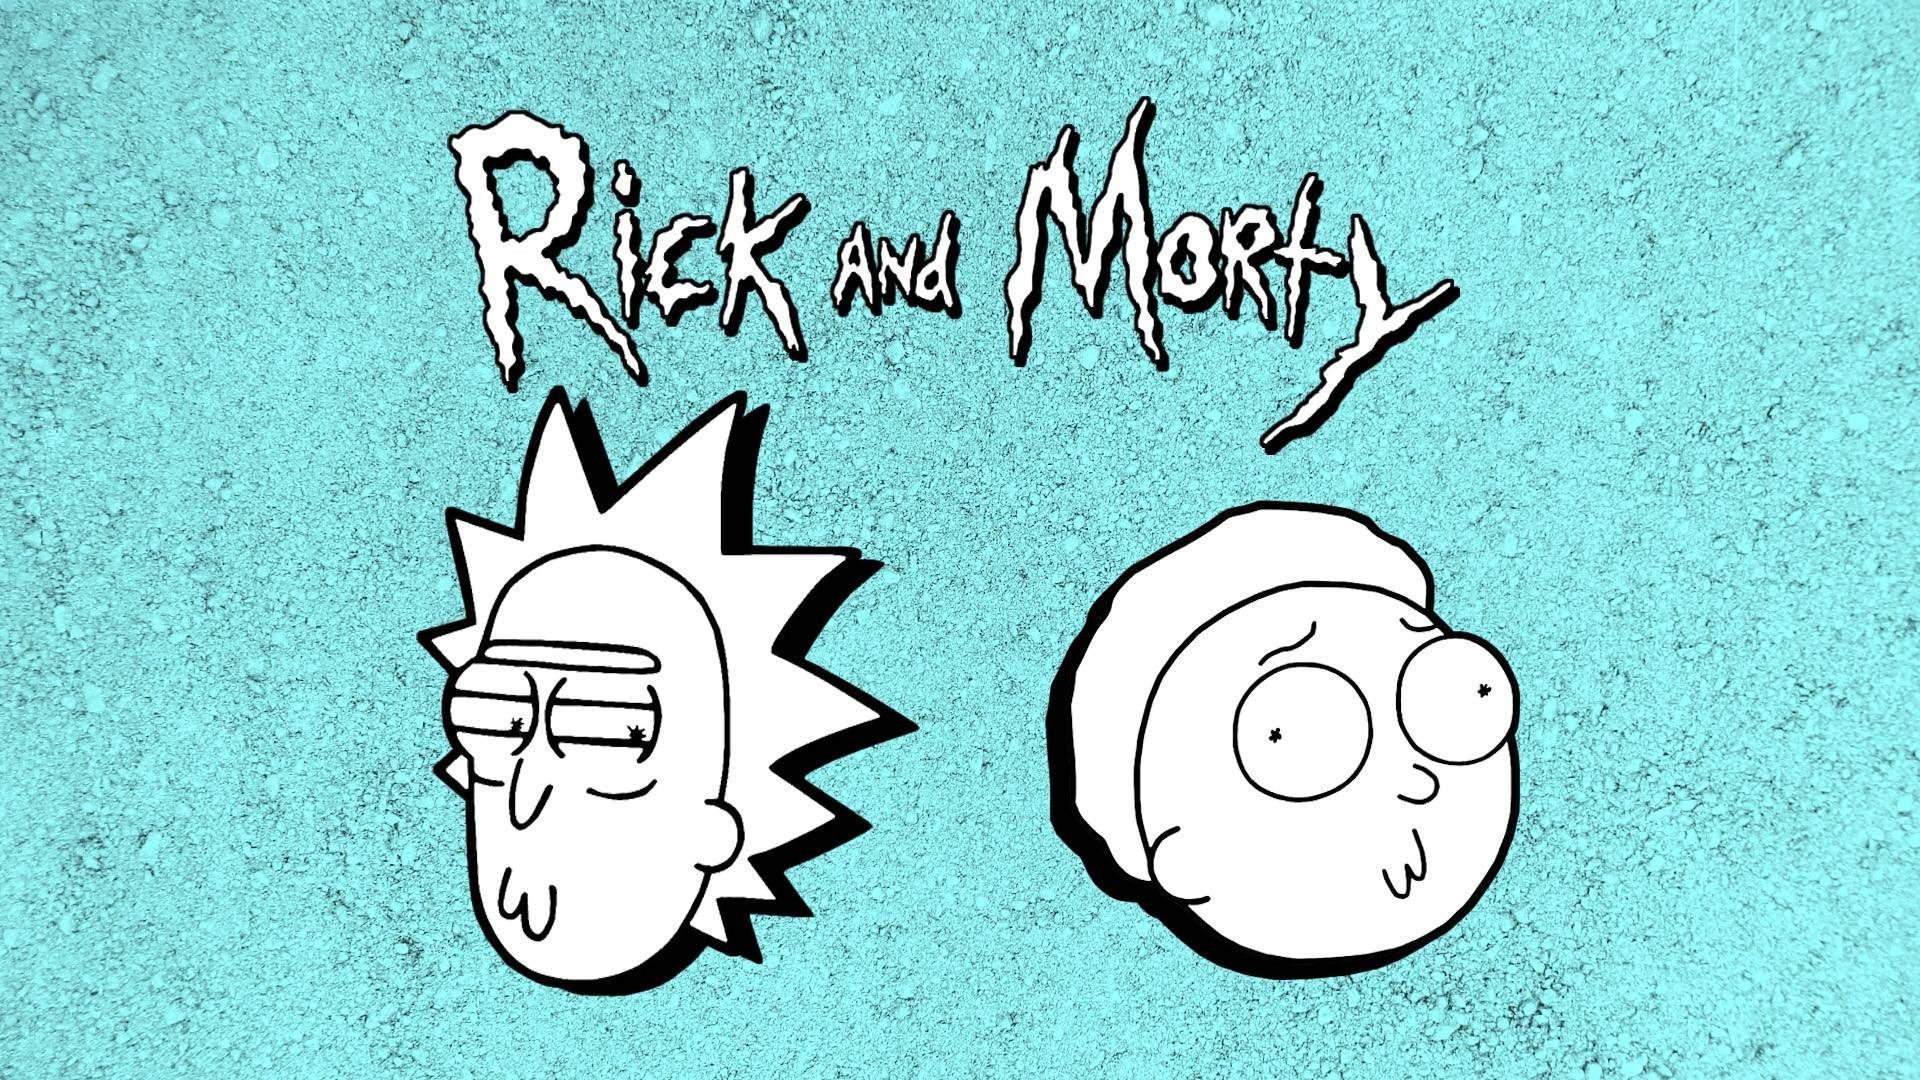 Rick and Morty Art Desktop Backgrounds HD with image resolution 1920x1080 pixel. You can use this wallpaper as background for your desktop Computer Screensavers, Android or iPhone smartphones